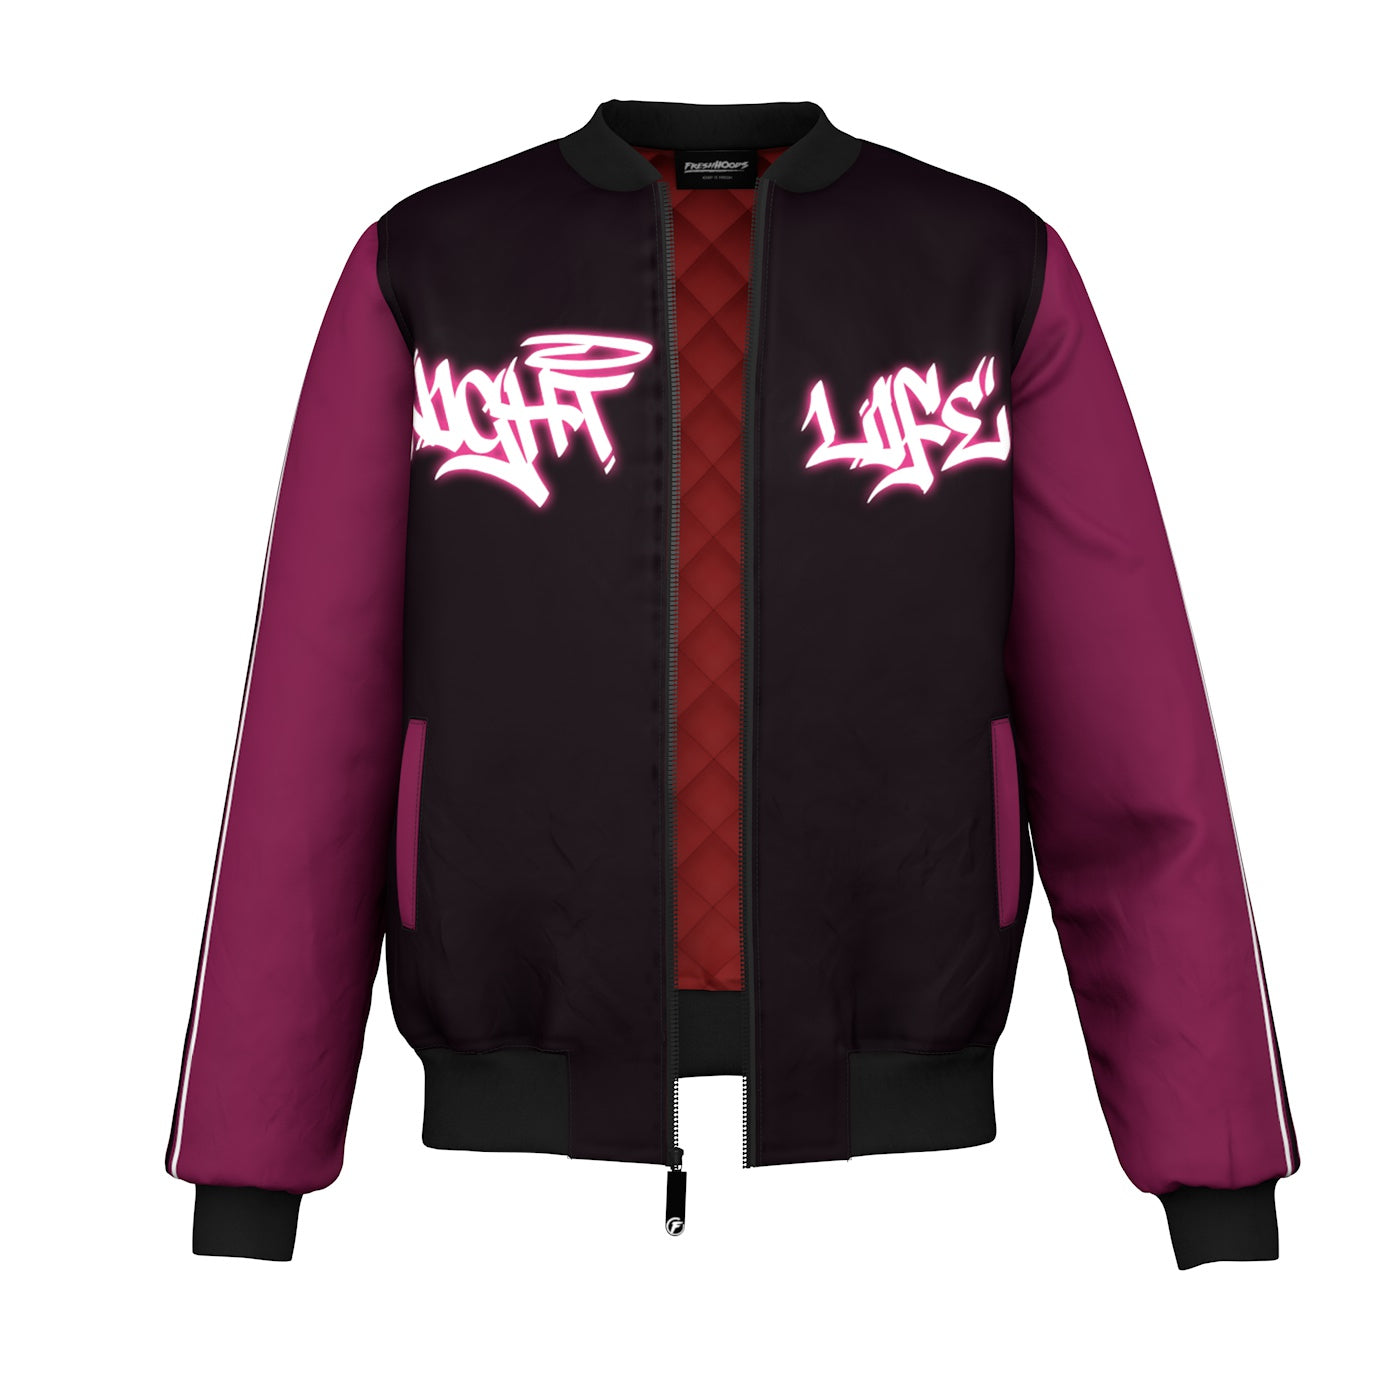 Neons In The Night Bomber Jacket